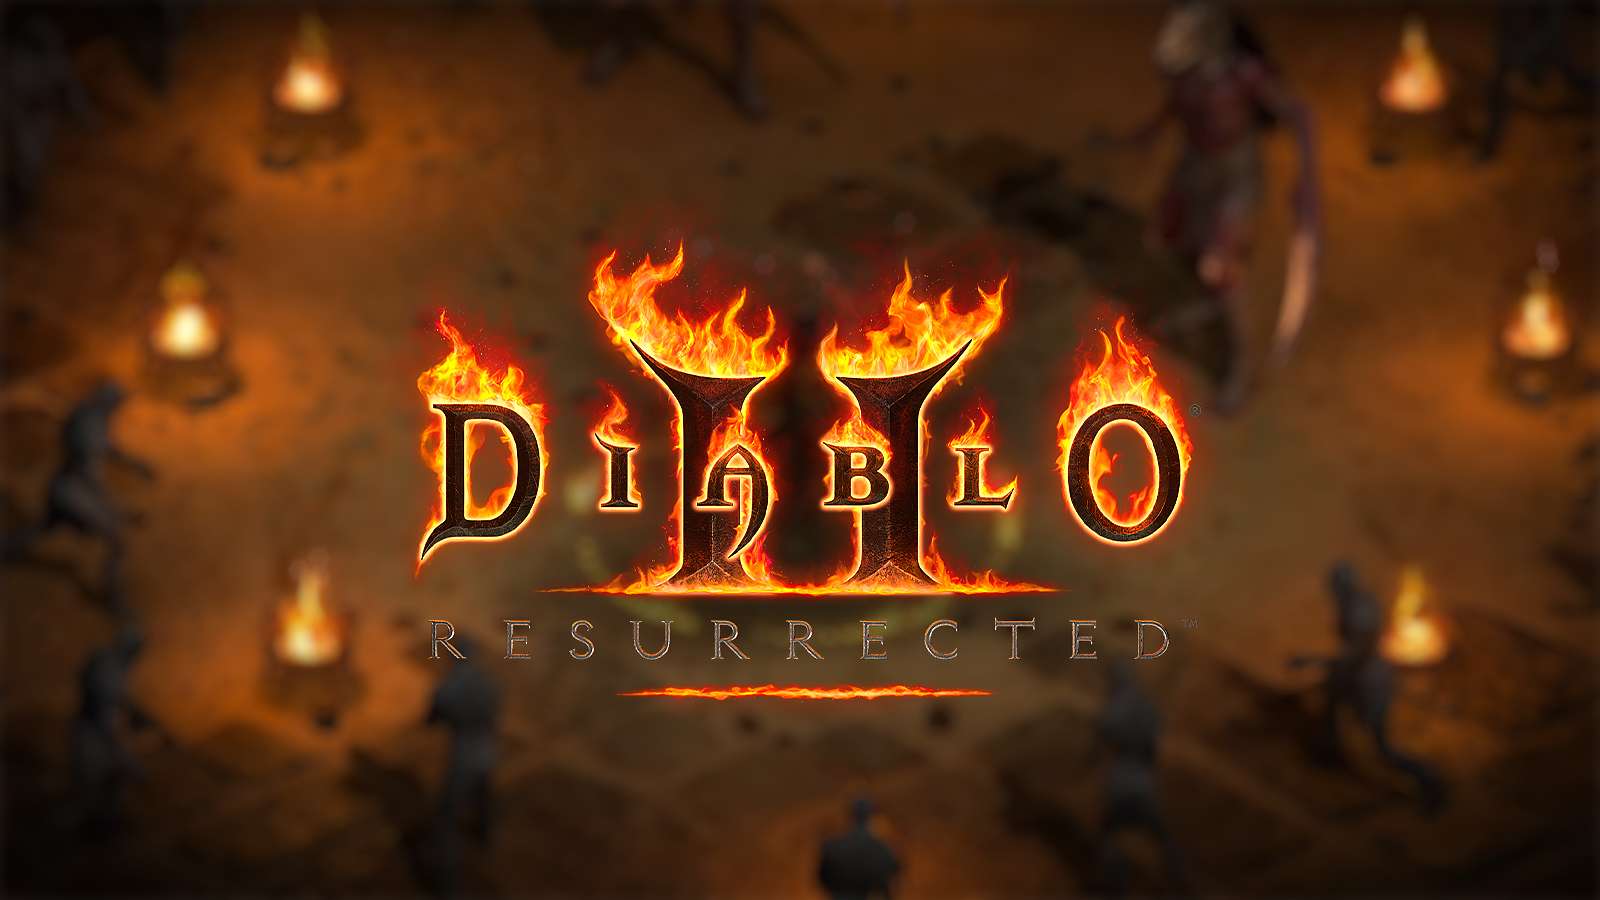 An image of the Diablo 2 Resurrected logo on a blurry background